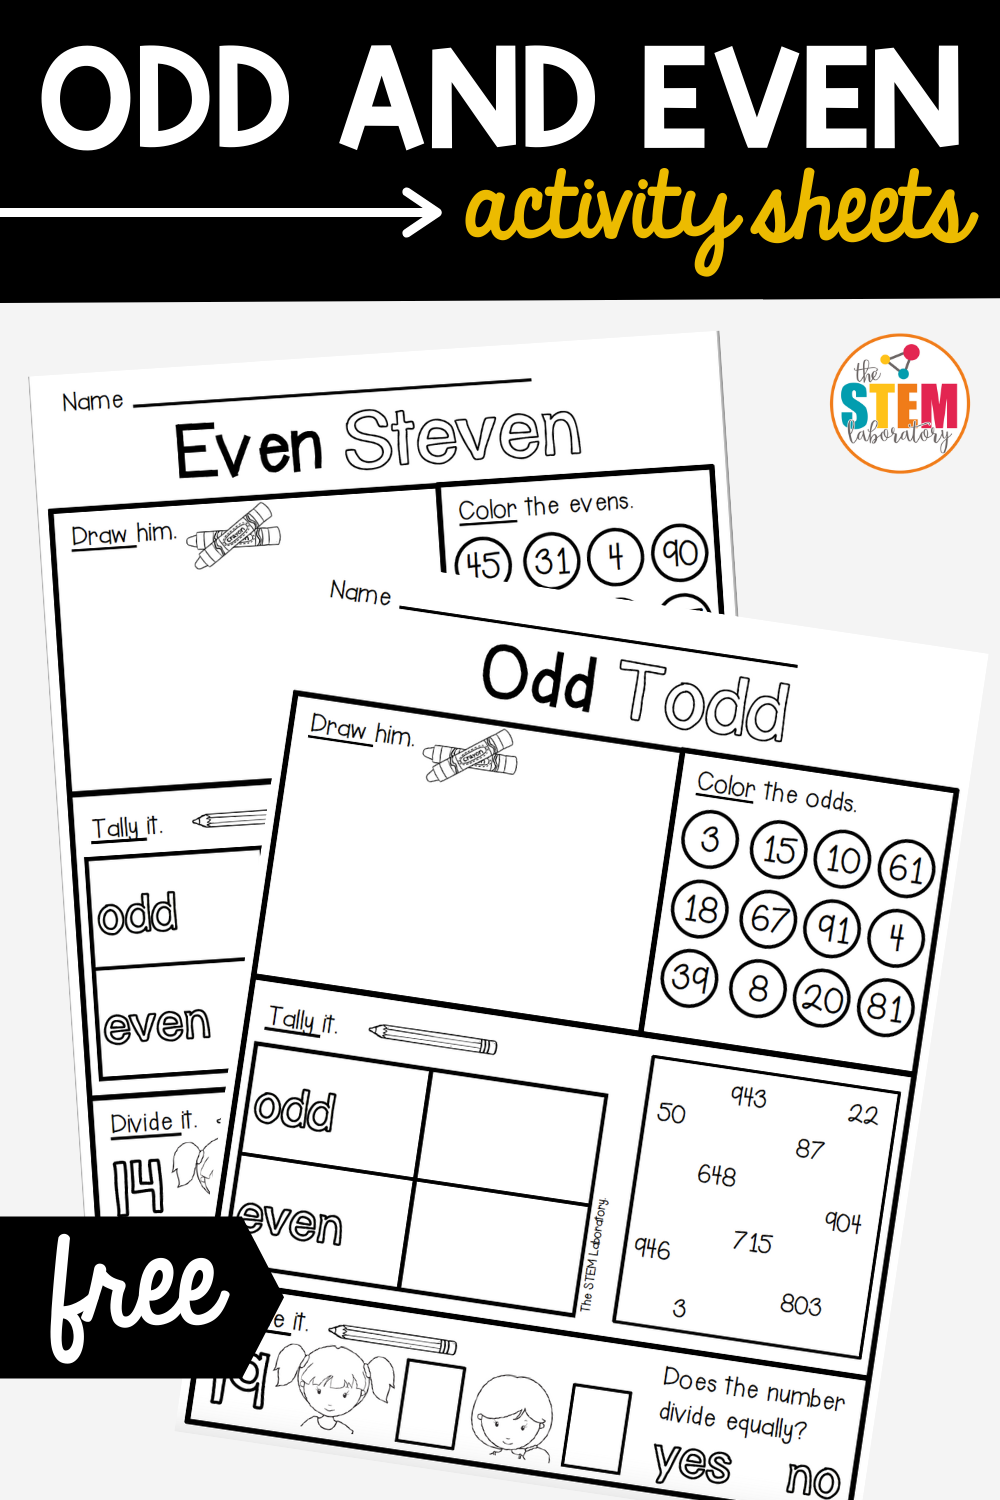 Odd and Even Activity Sheets - The Stem Laboratory Within Odds And Even Worksheet